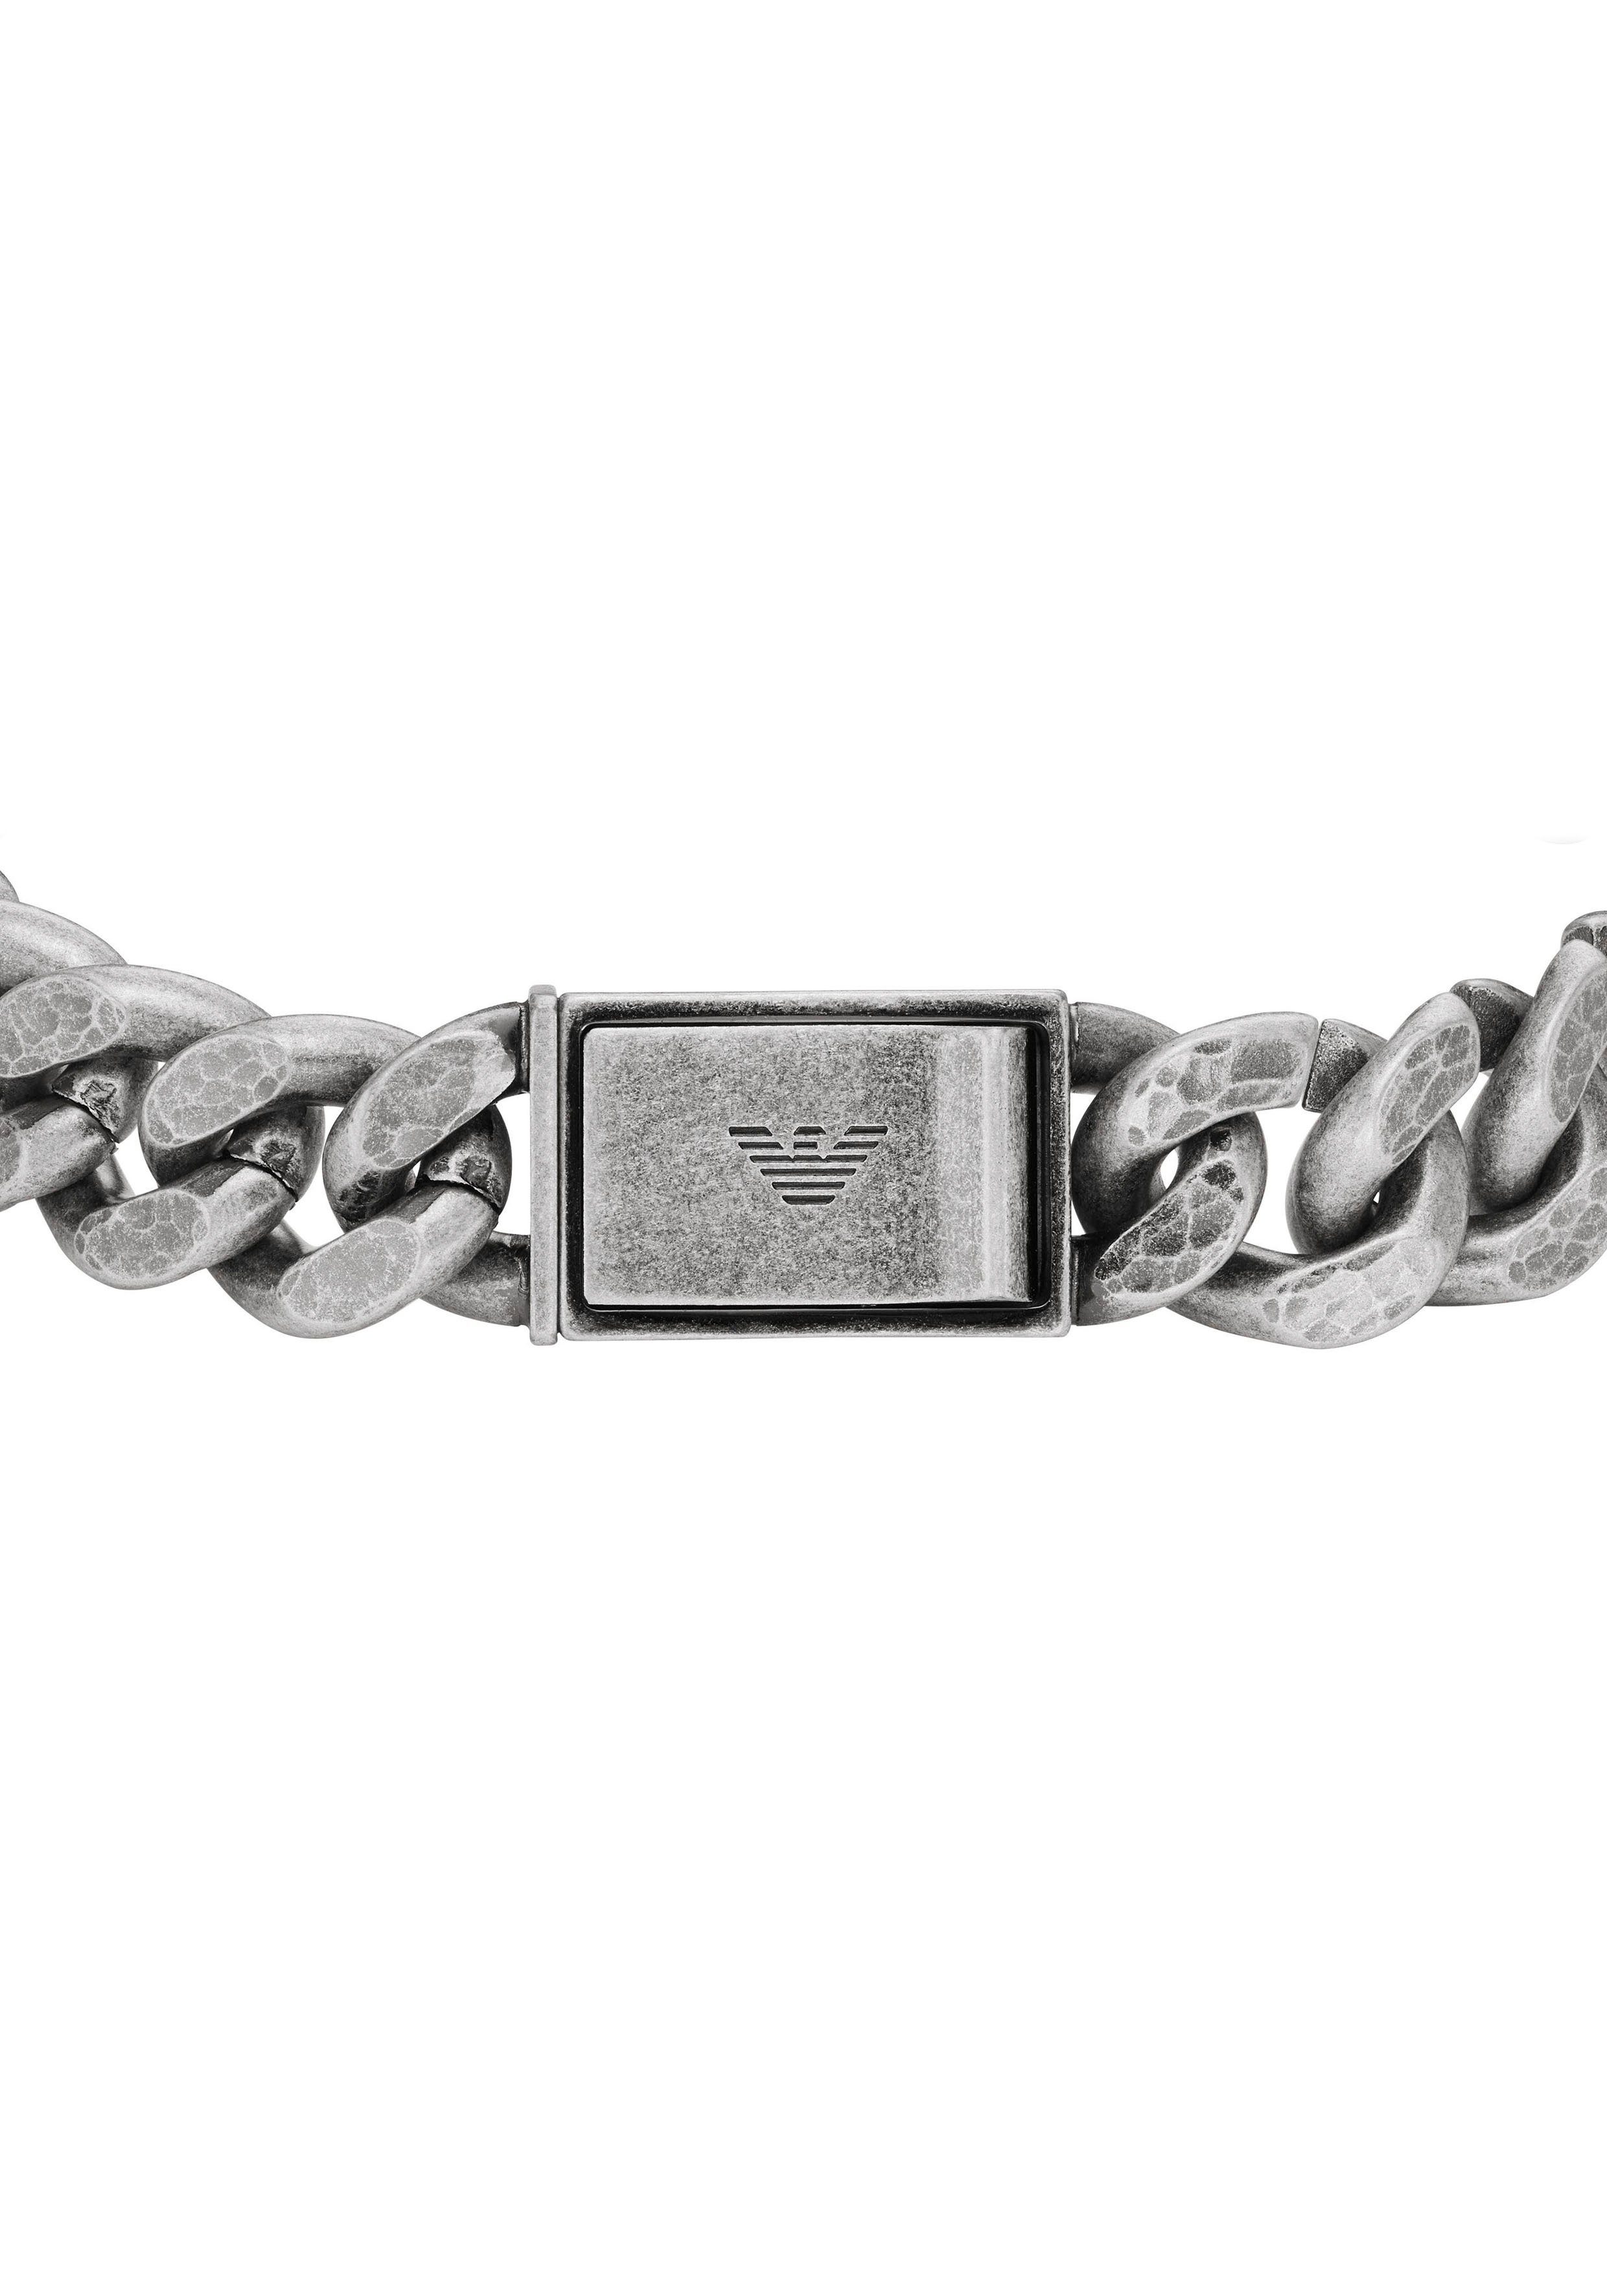 CHAINED, Emporio EGS3036040 TREND, ICONIC Armani Armband